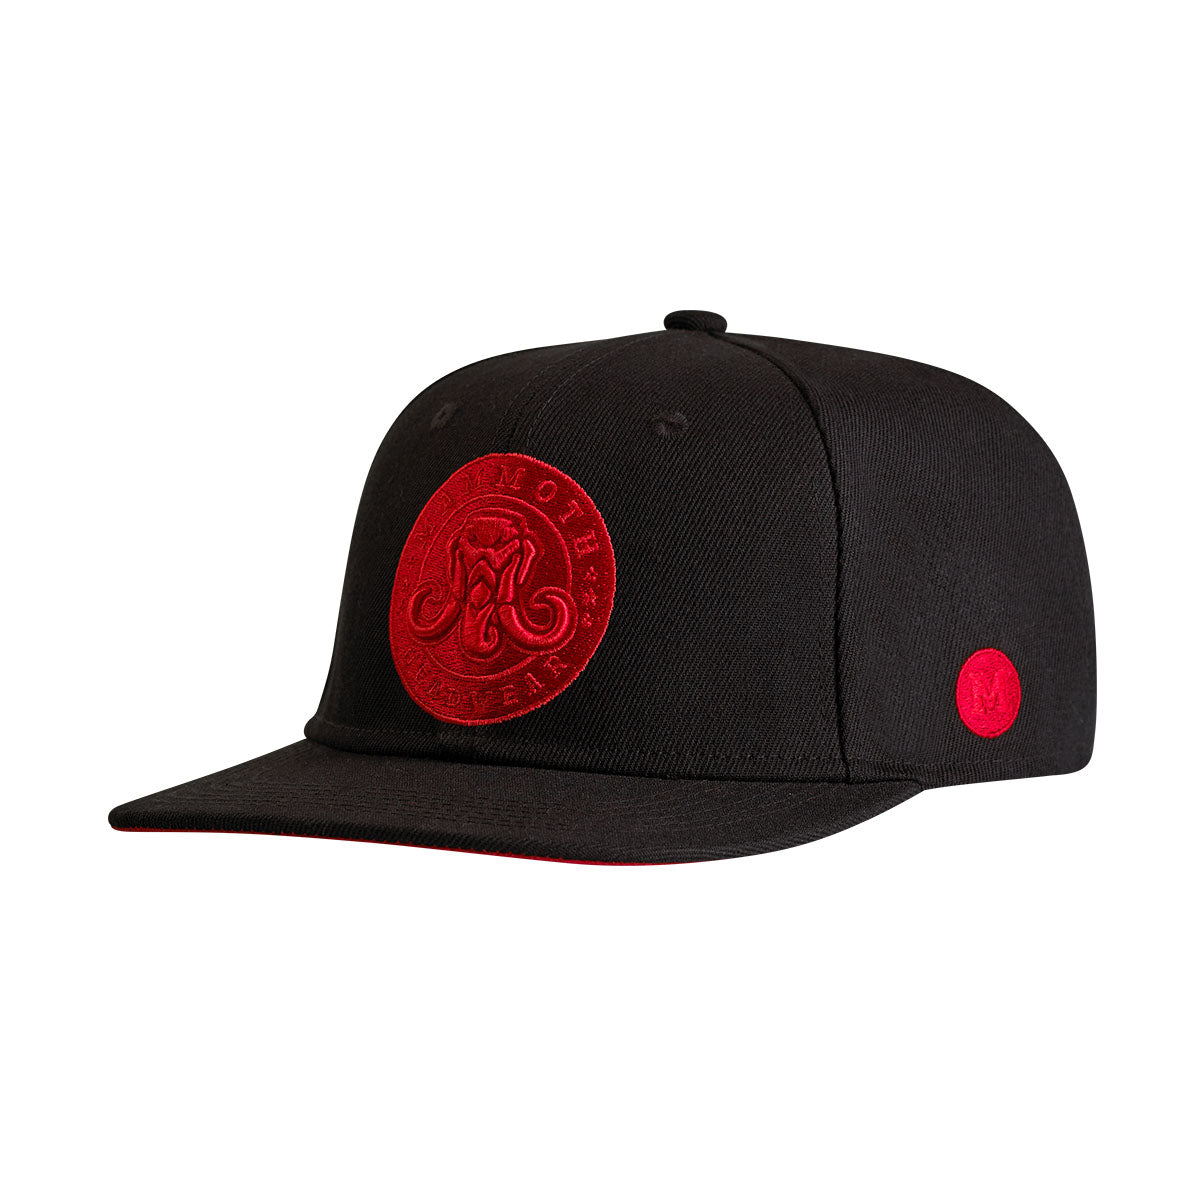 black and red snapback